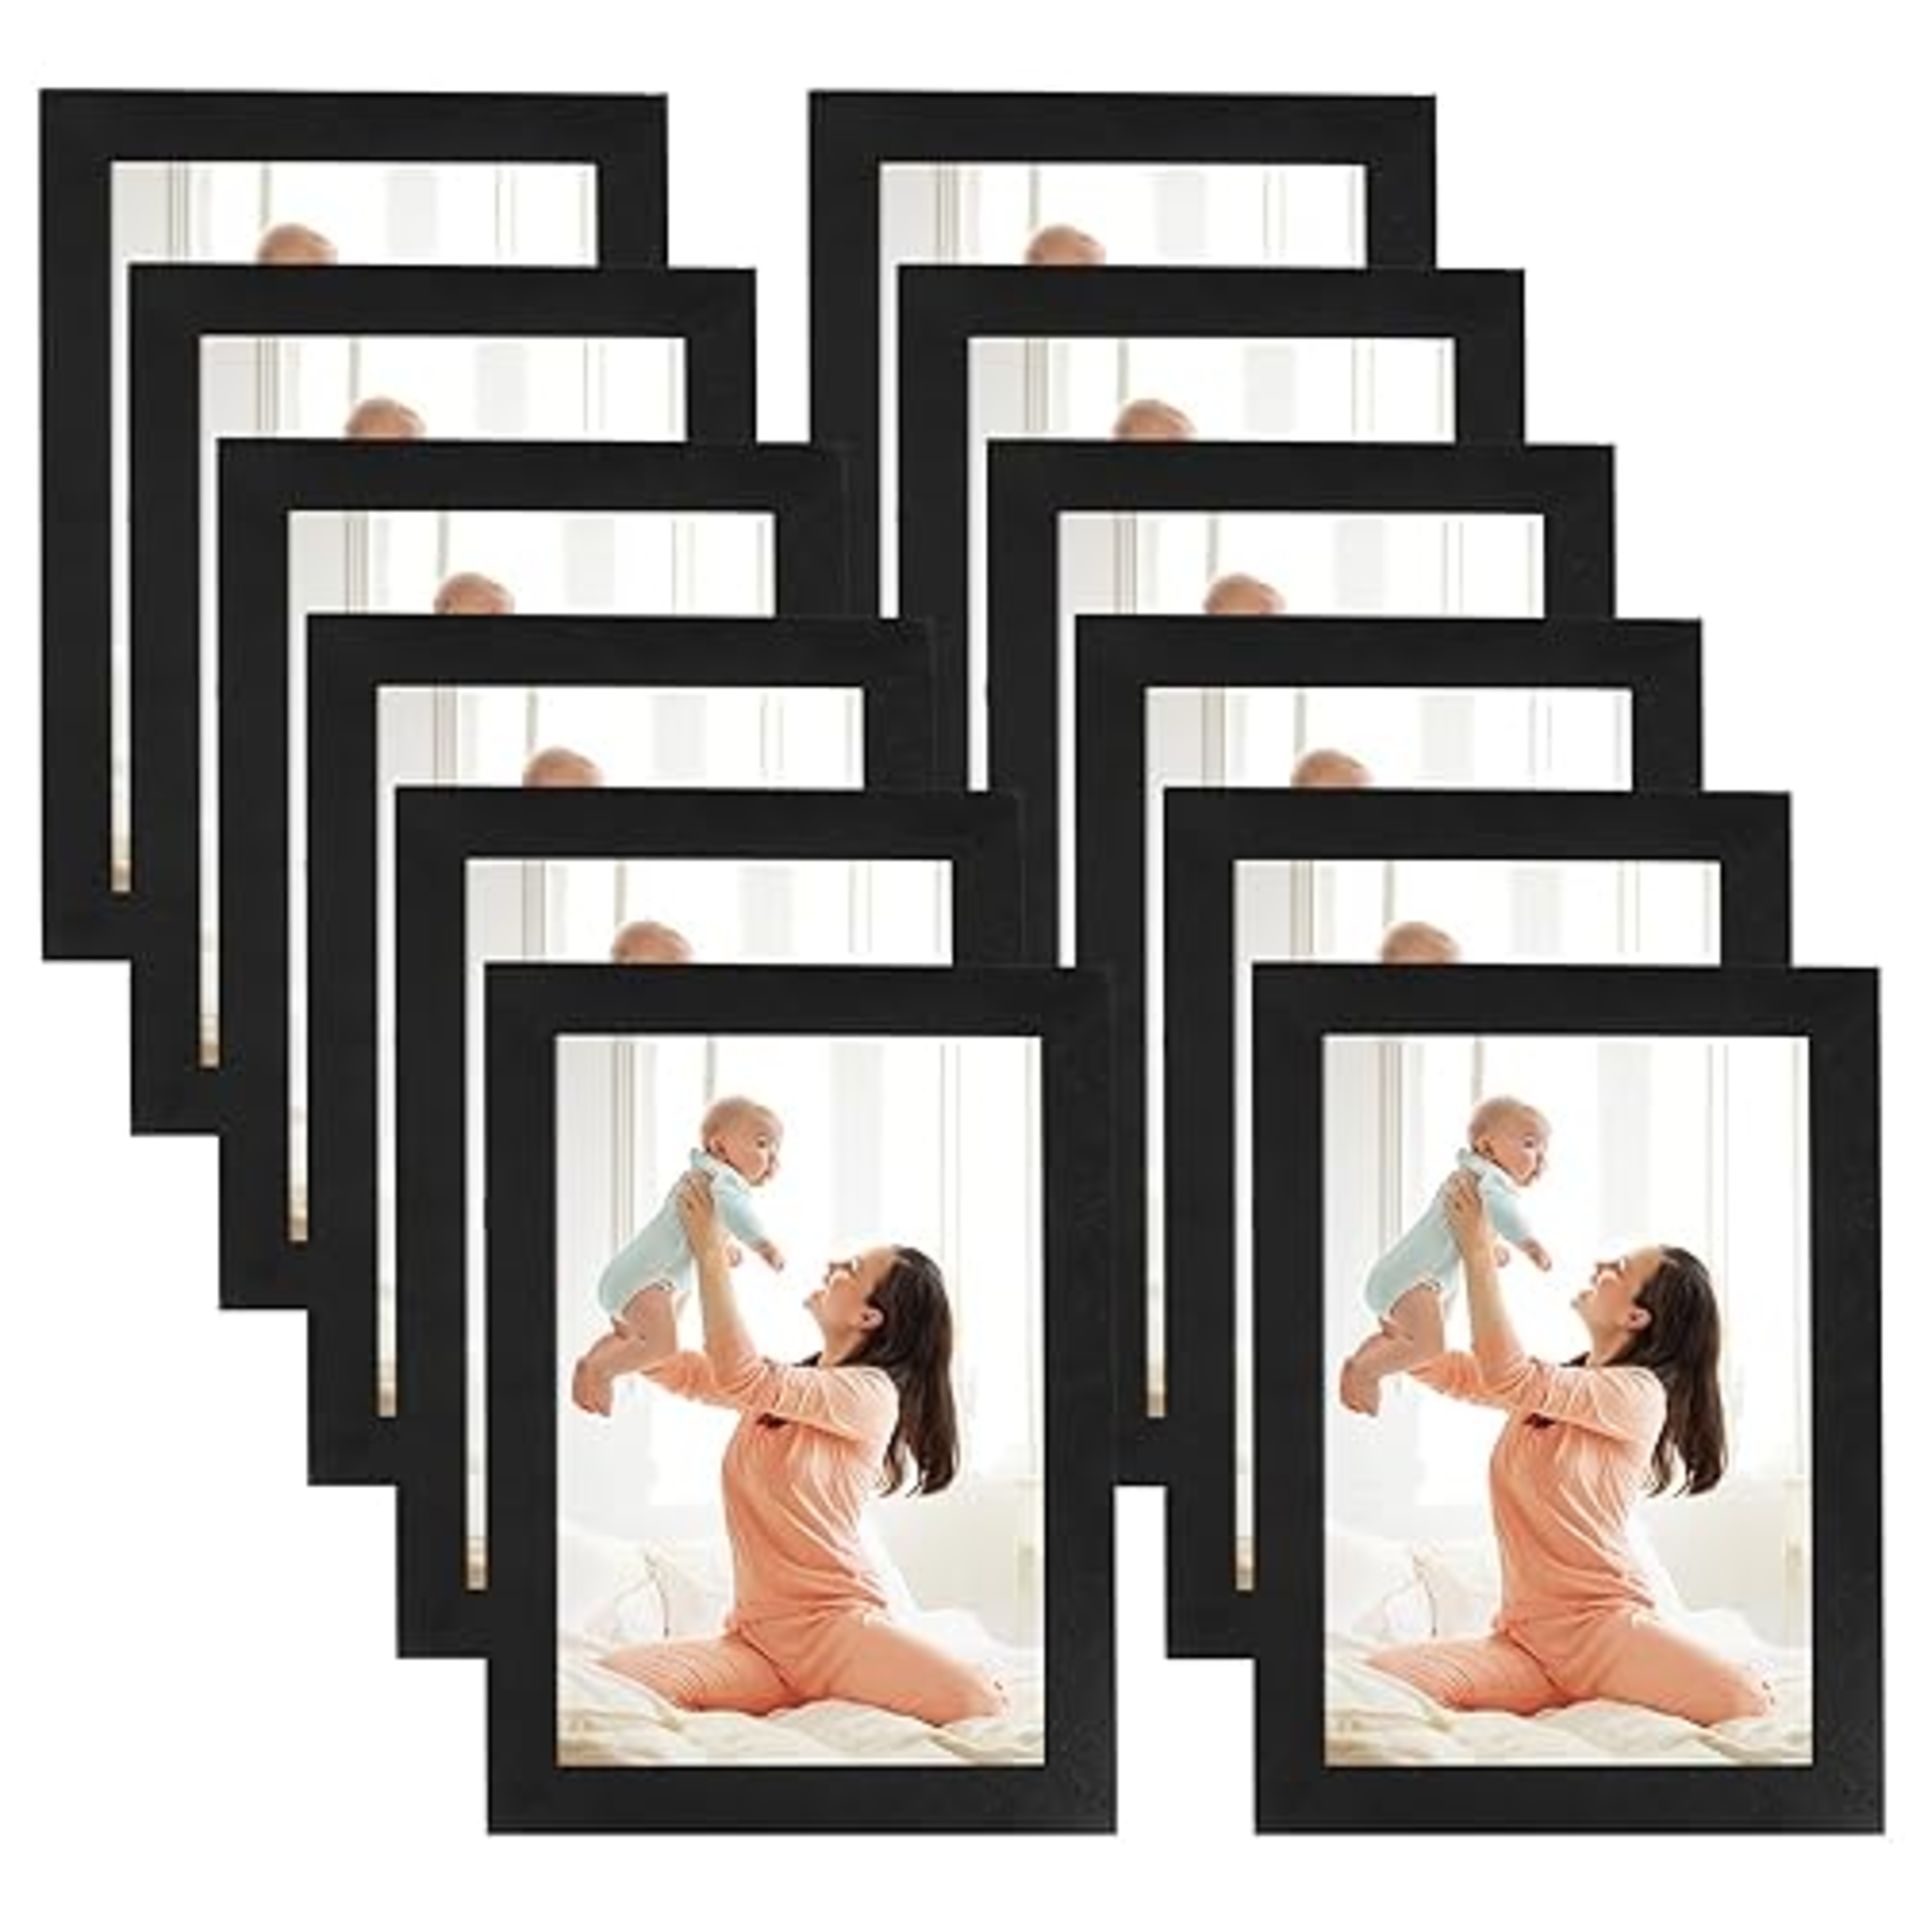 RLAVBL 4x6 Picture Frames Set of 12, Black Magnetic Photo Frame with Self Adhesive Backing for Wind